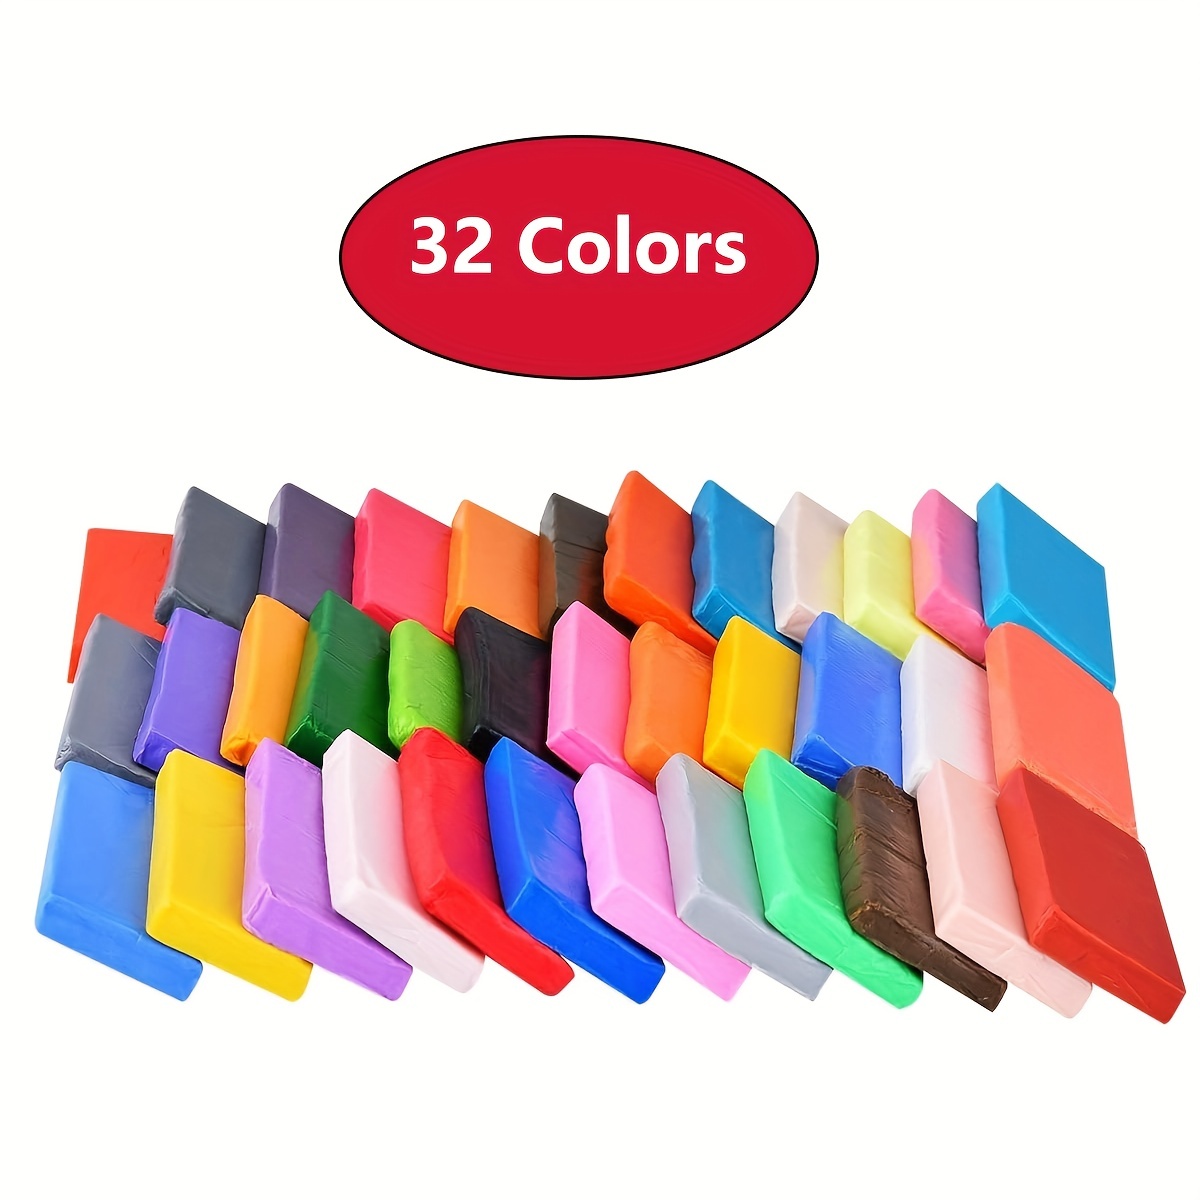 32 Colors Small Block Polymer Clay Starter Kit, Oven Bake Clay, Non-Toxic  Molding DIY Clay, Great For Boys ,girls, Beginners